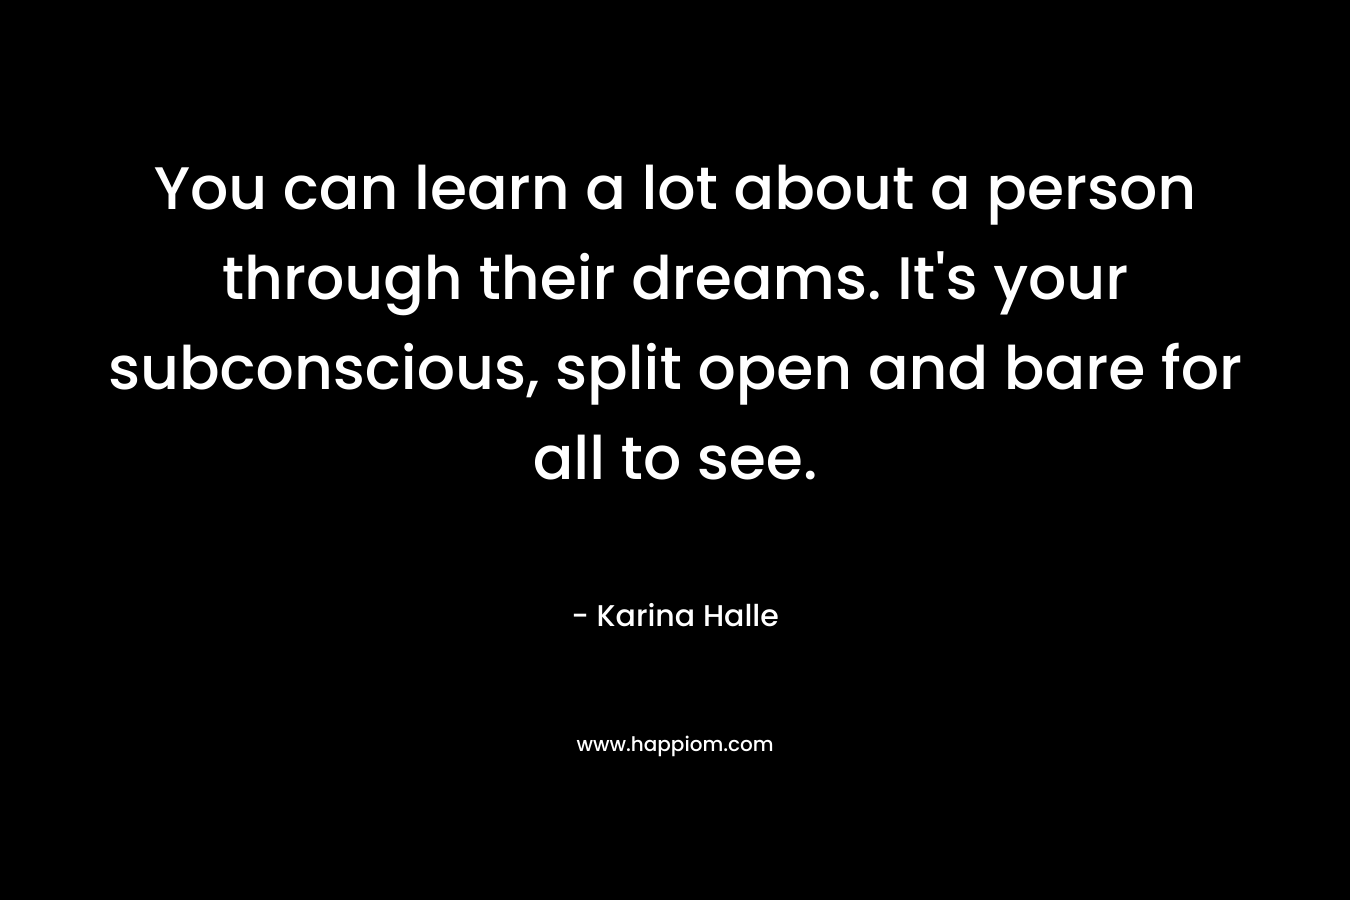 You can learn a lot about a person through their dreams. It's your subconscious, split open and bare for all to see.